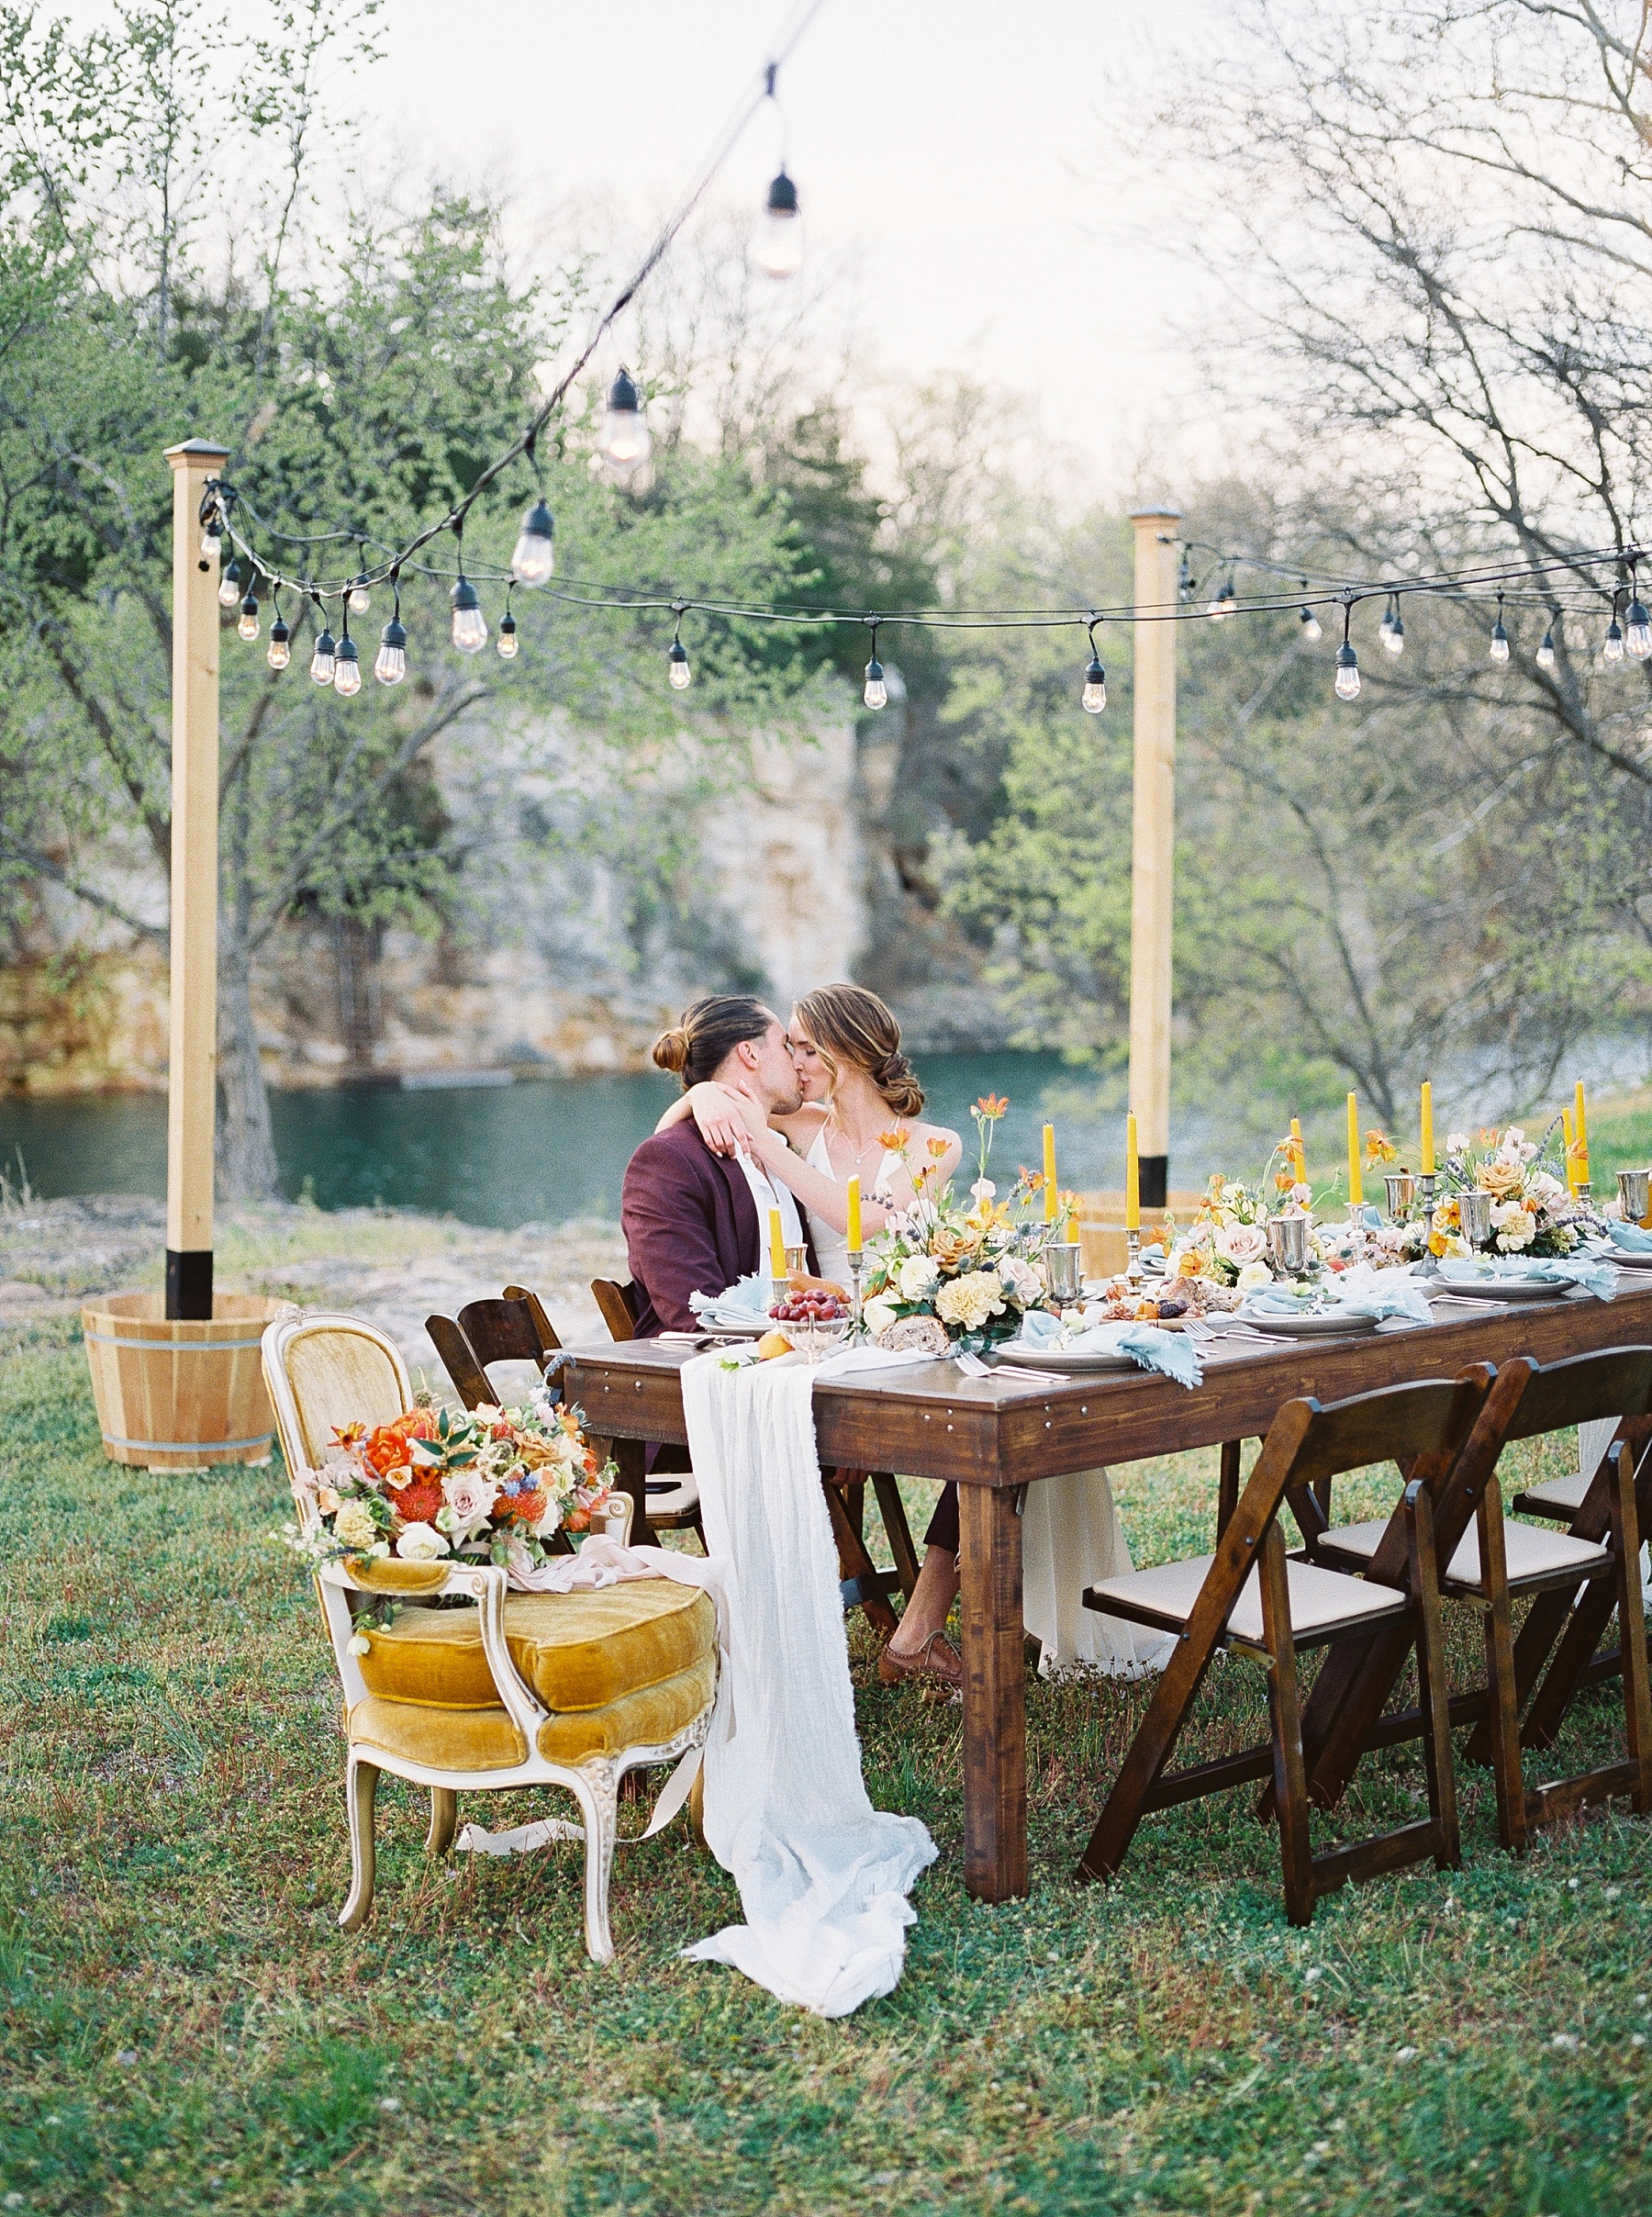 Intimate Spanish and French Inspired Destination Wedding with Lakeside Dinner Party at Dusk at Wildcliff by Kelsi Kliethermes Photography Best Missouri and Maui Wedding Photographer_0082.jpg